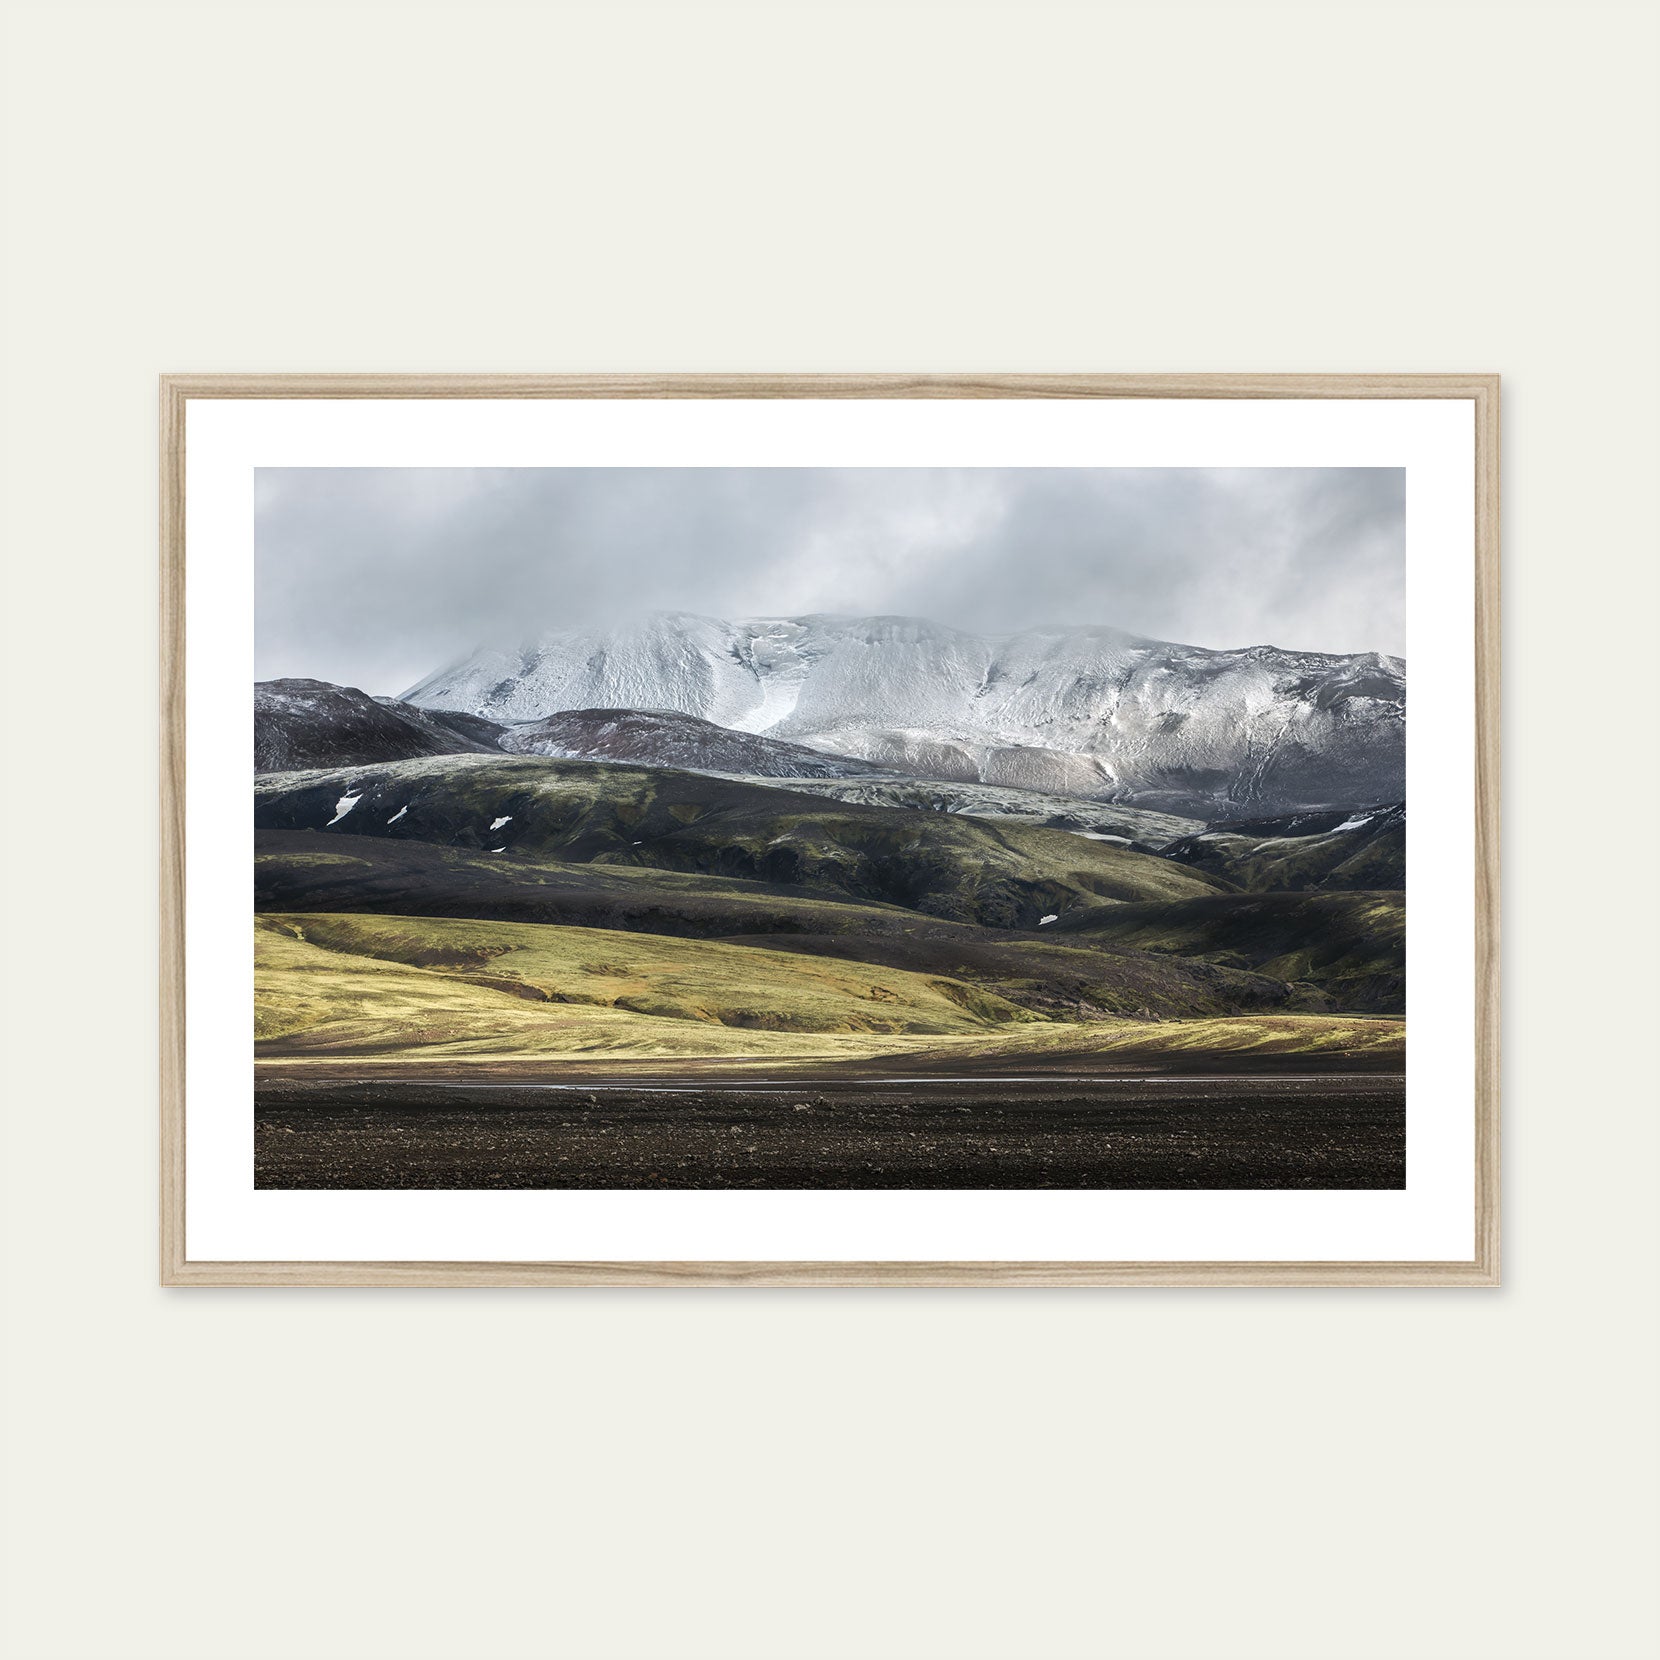 A wood framed print of a mountain range in Iceland